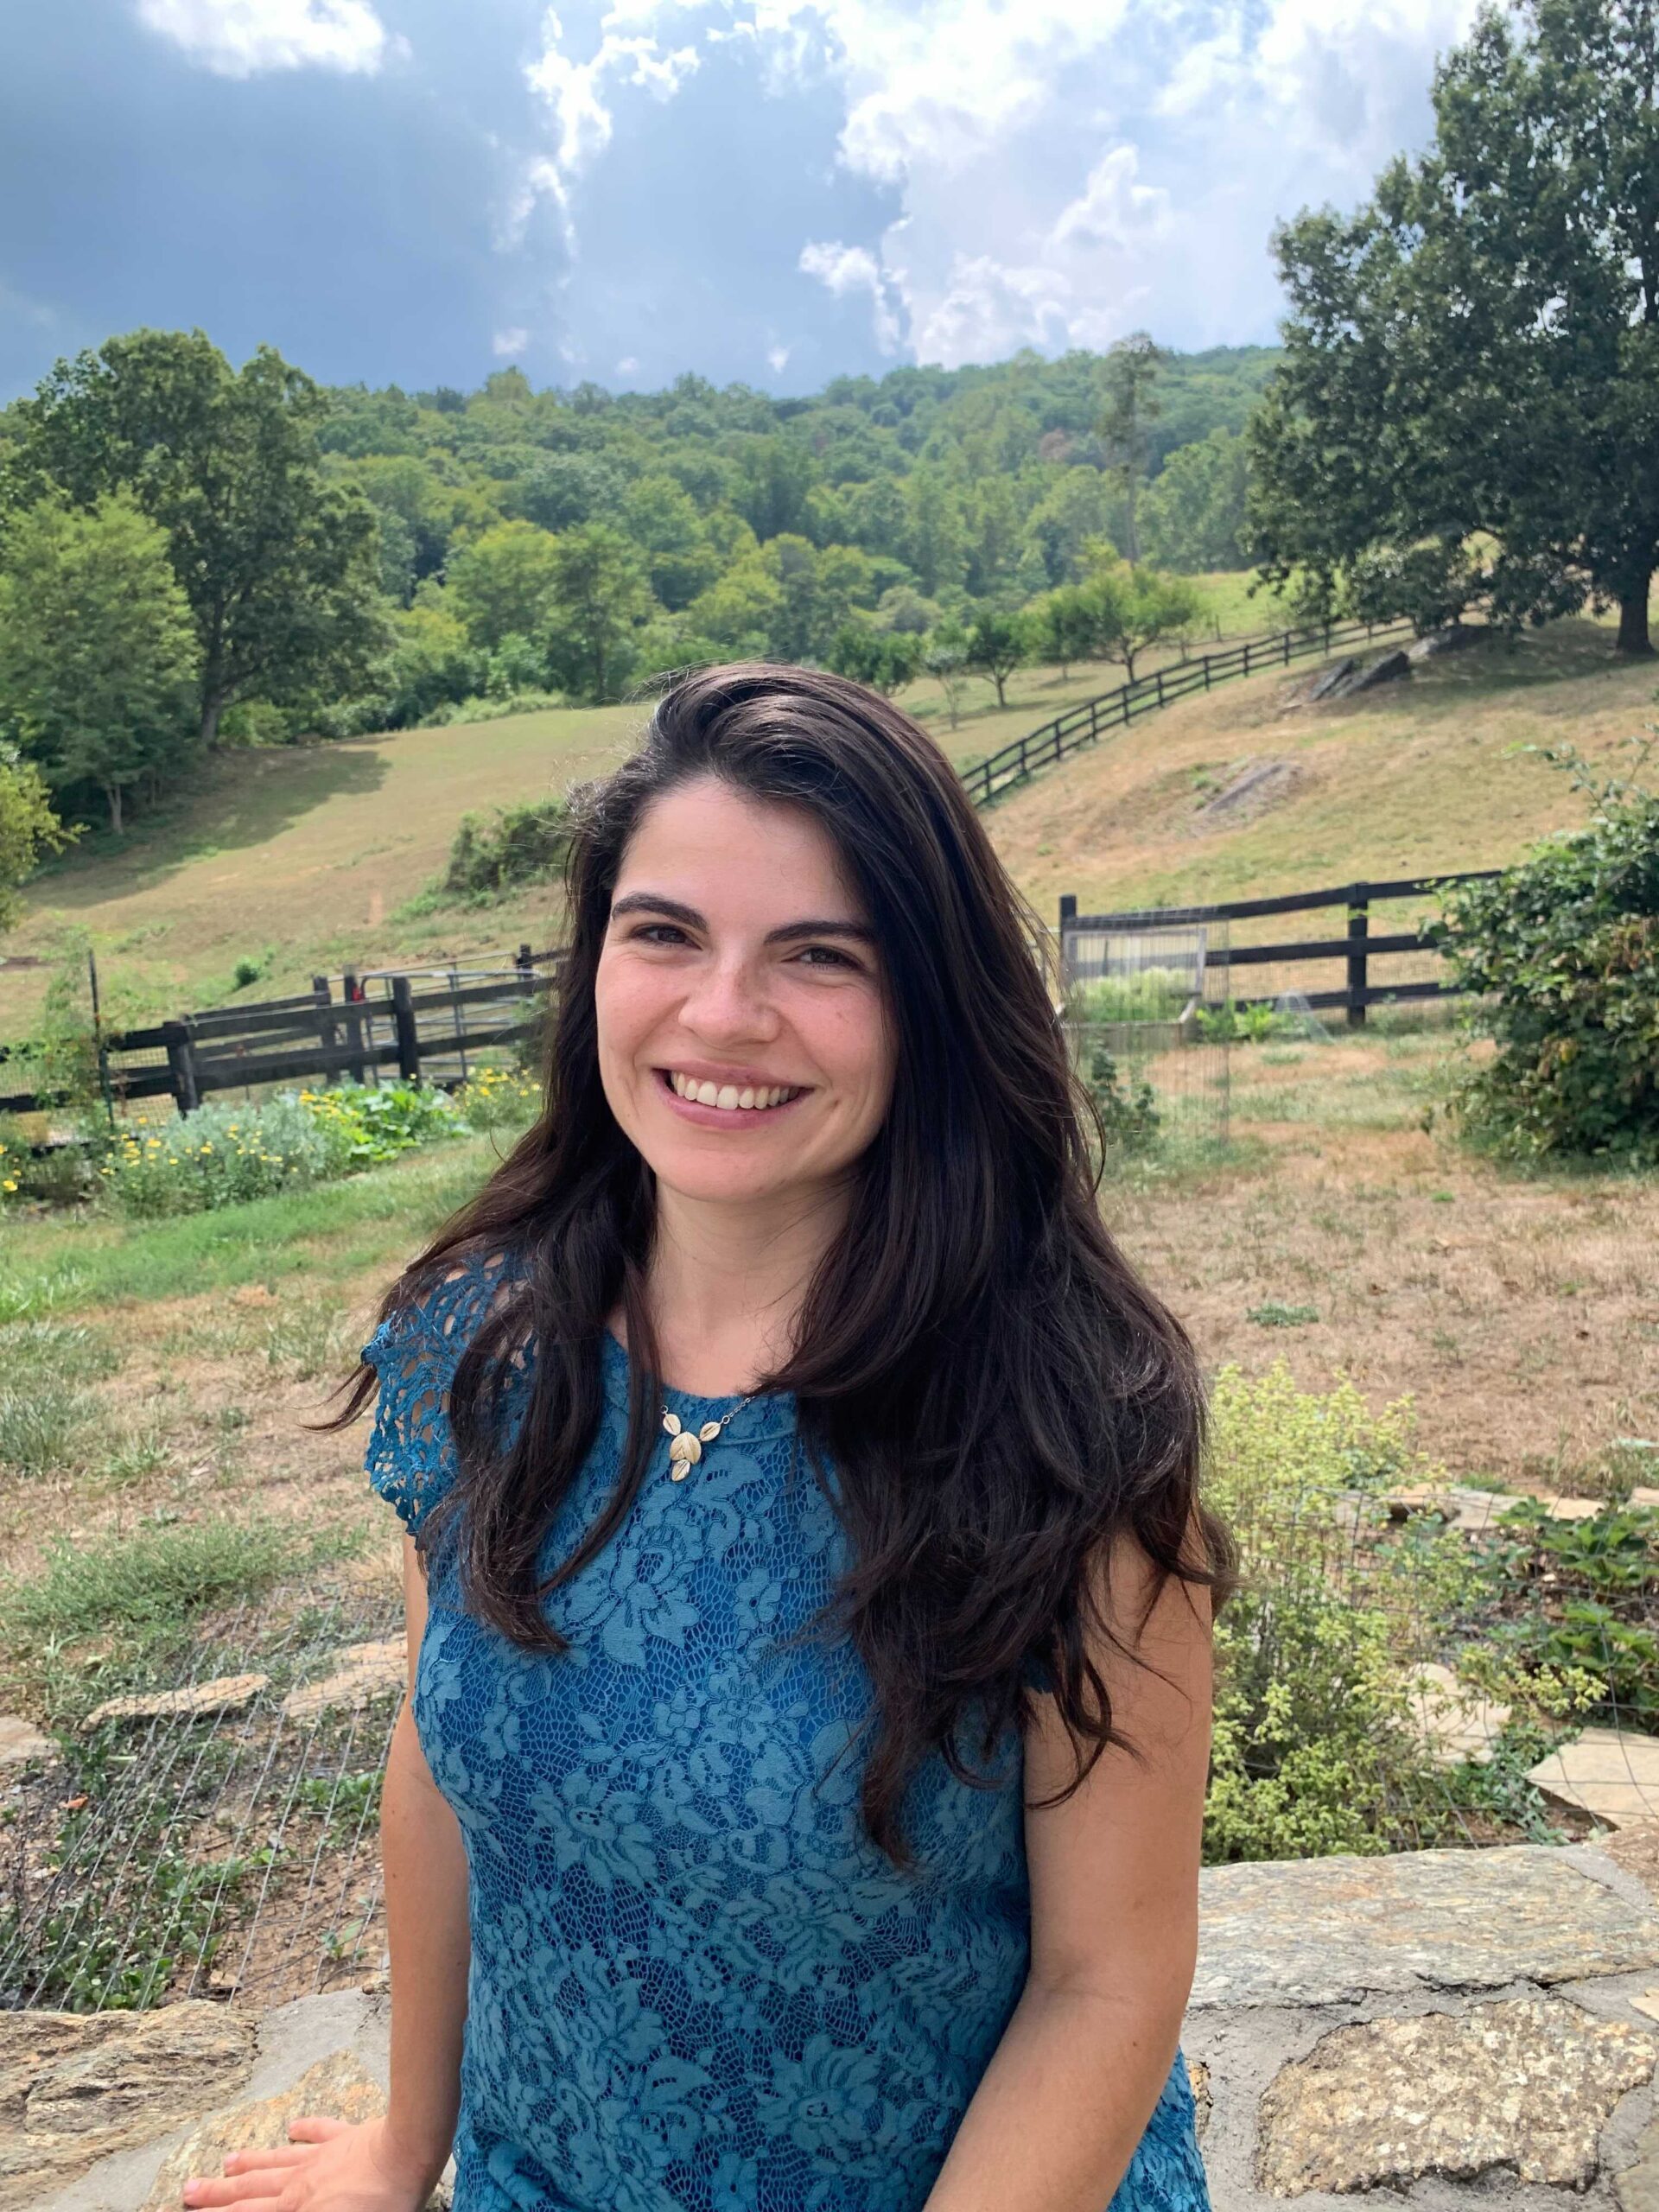 Jennifer Rogers is outstanding in her field — literally — with a split rail fence in the background and deciduous woods beyond that. This scholar of European and Hispanic ancestry has a wide, welcoming smile which is reflected in her eyes. She has chosen a rich blue top and wears her dark hair flowing freely.